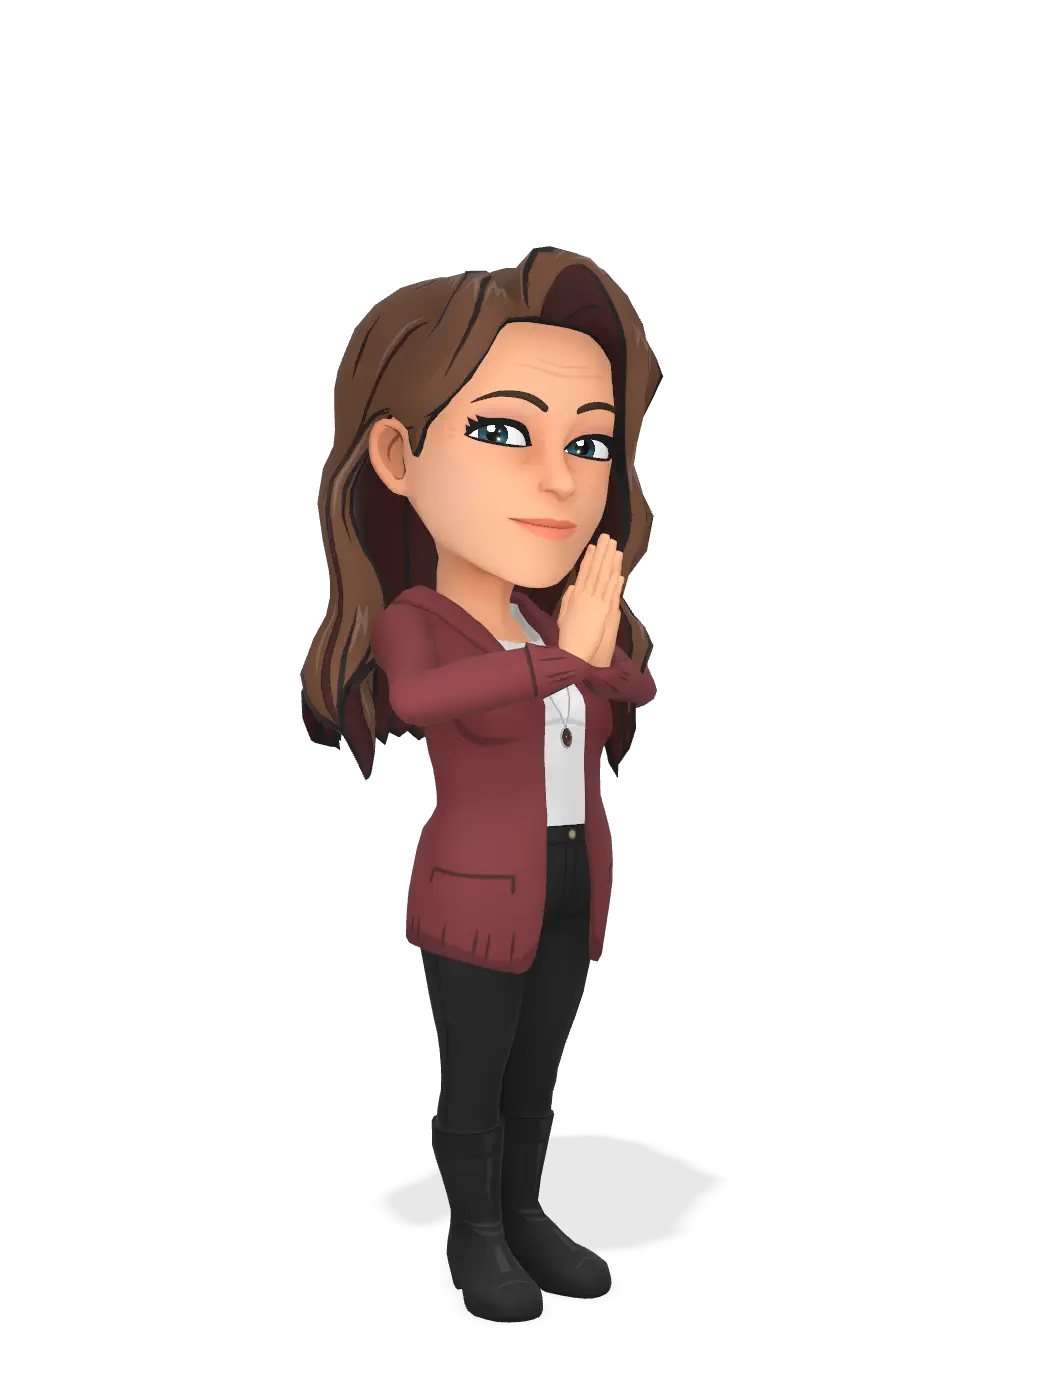 3D Bitmoji for youroilgal74